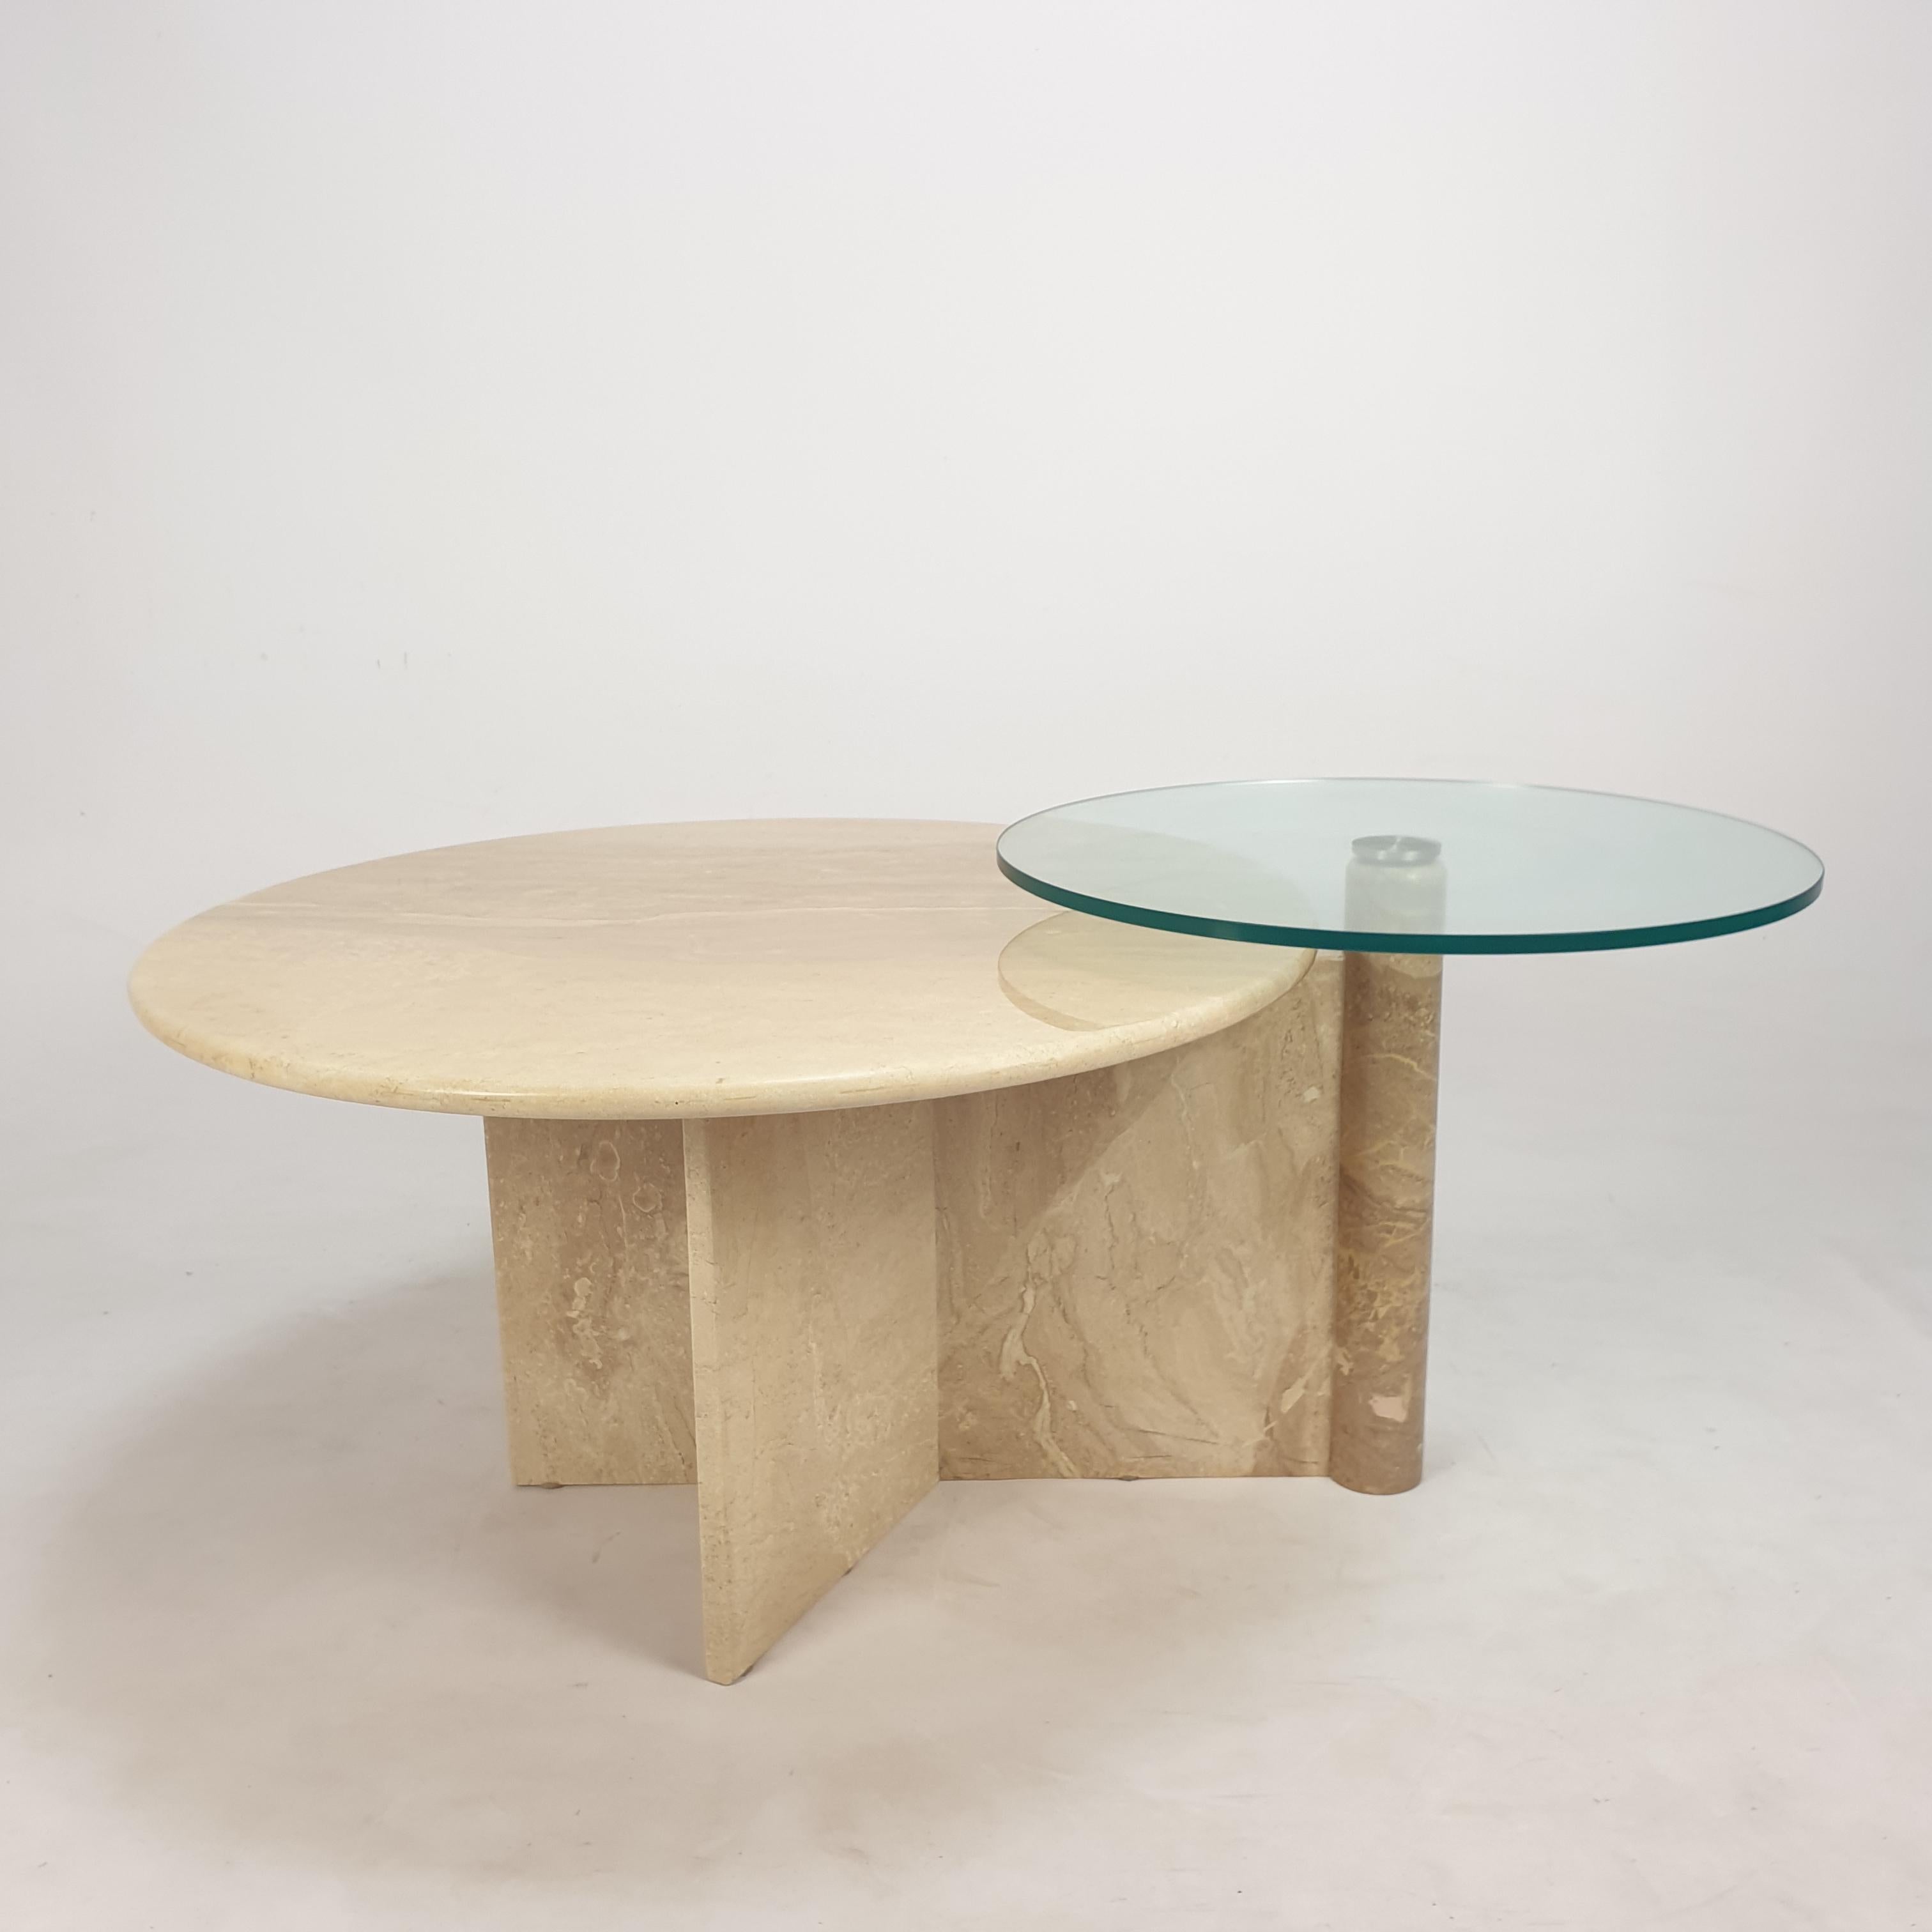 Italian Travertine and Glass Coffee Table, 1980s For Sale 3